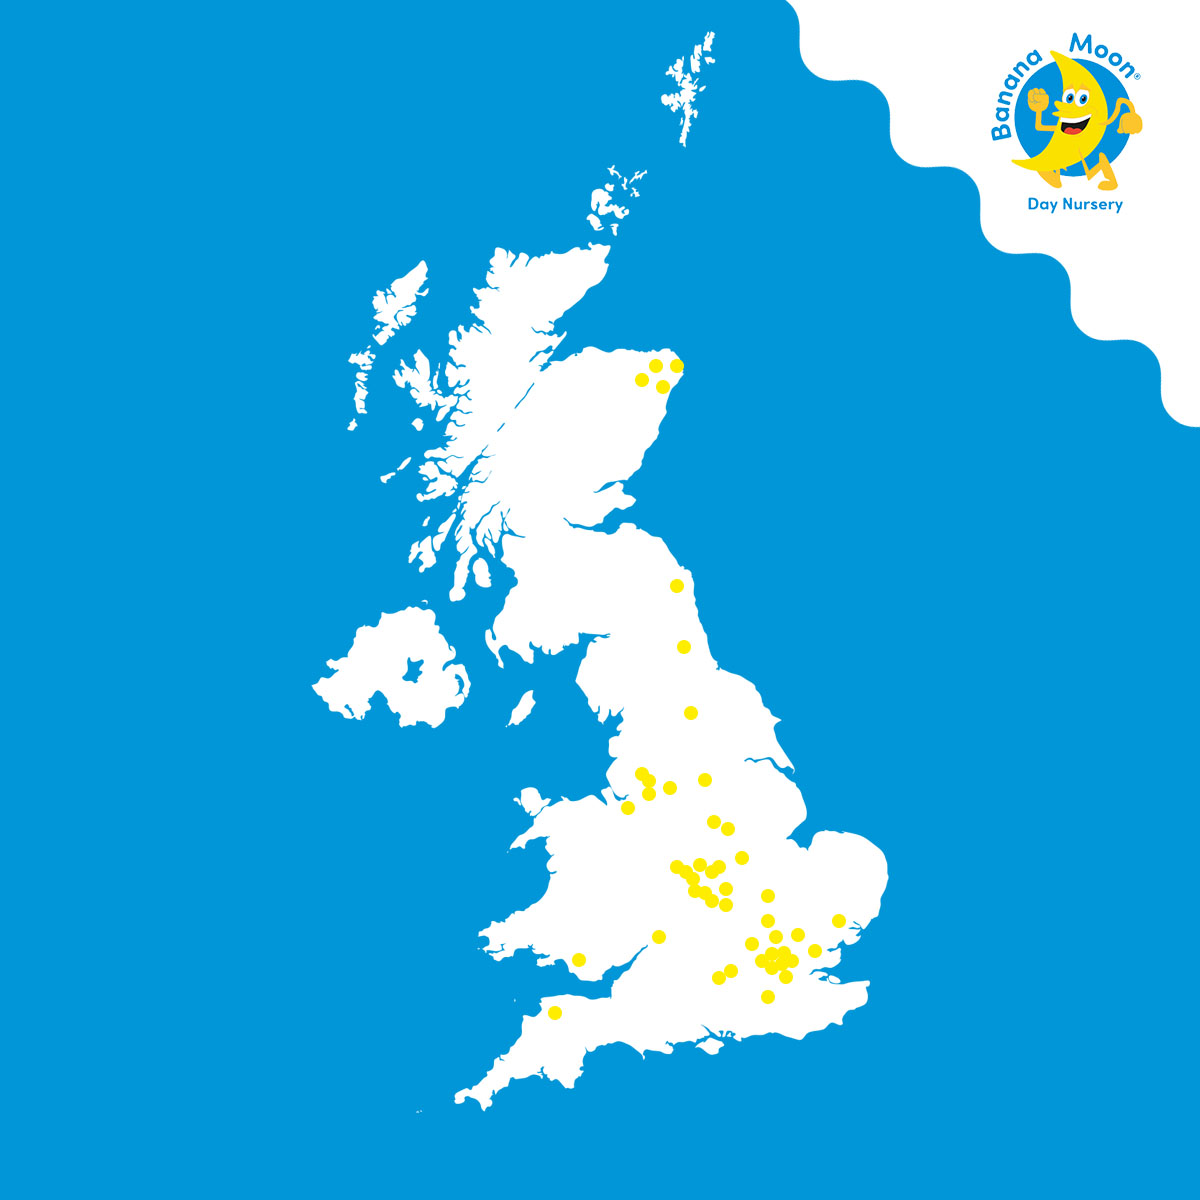 Did you know there are 49 Banana Moon Franchise nurseries nationally?